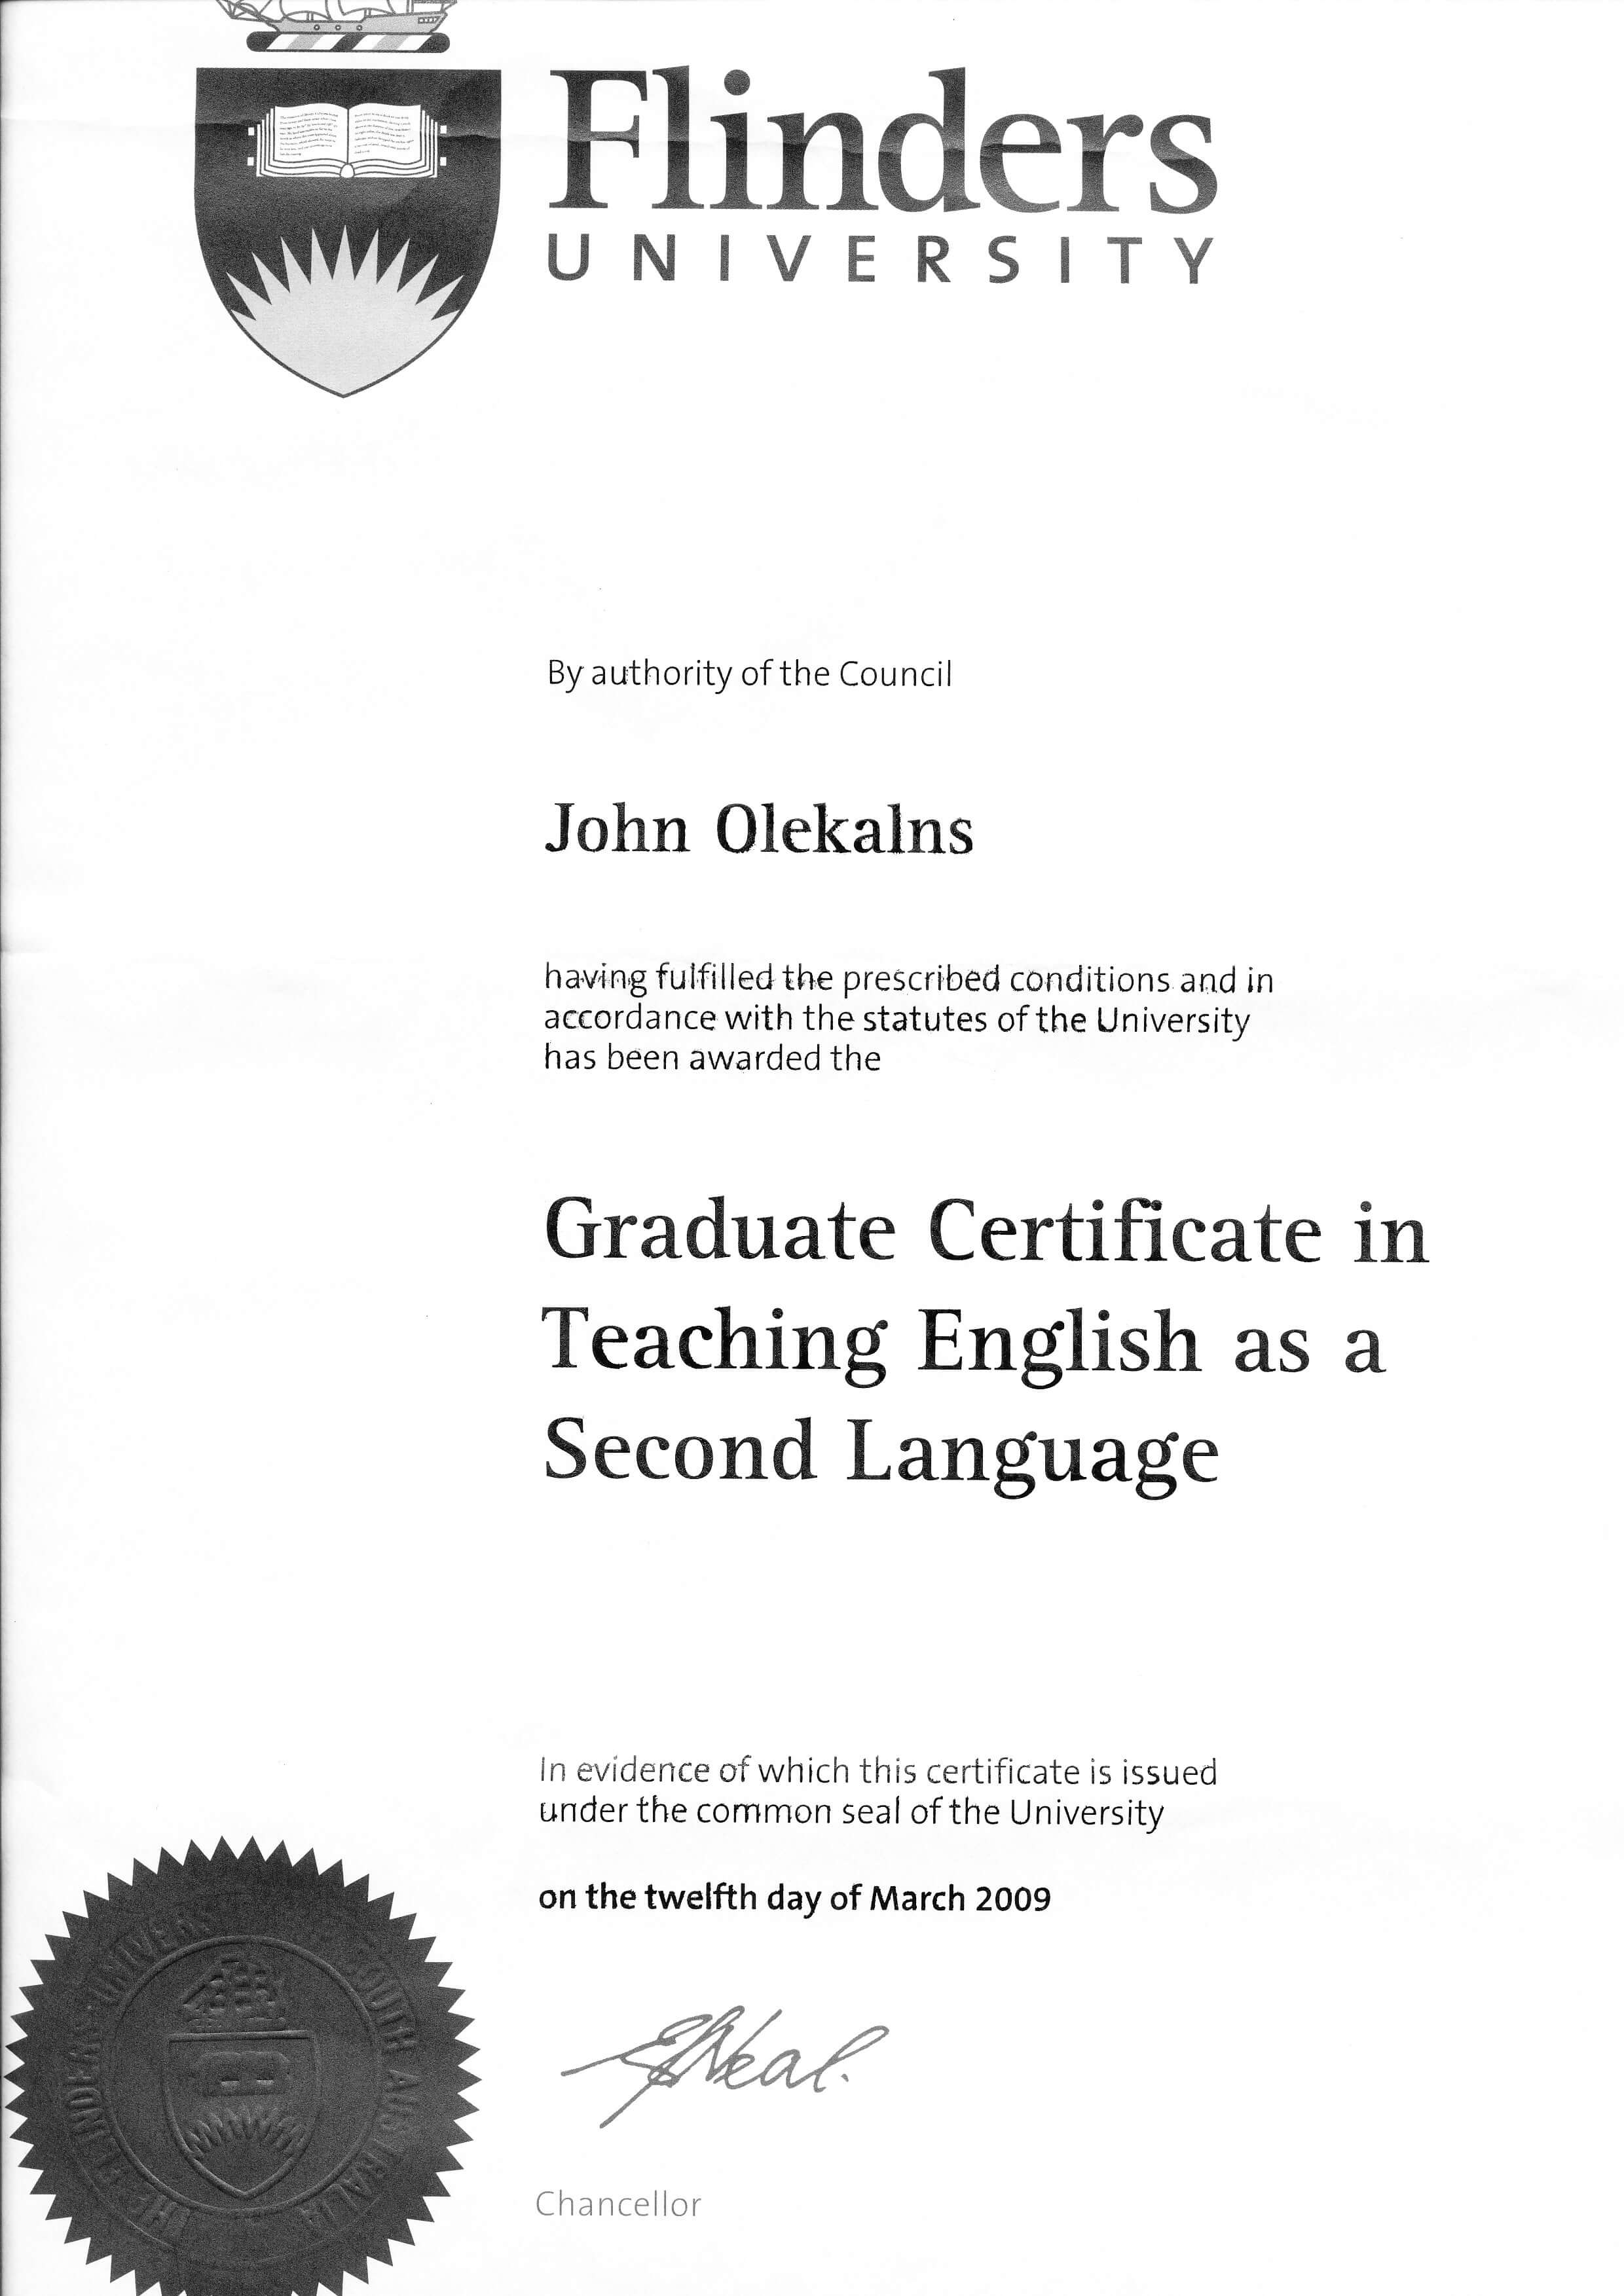 Graduate Certificate in Teaching English as a Second Language